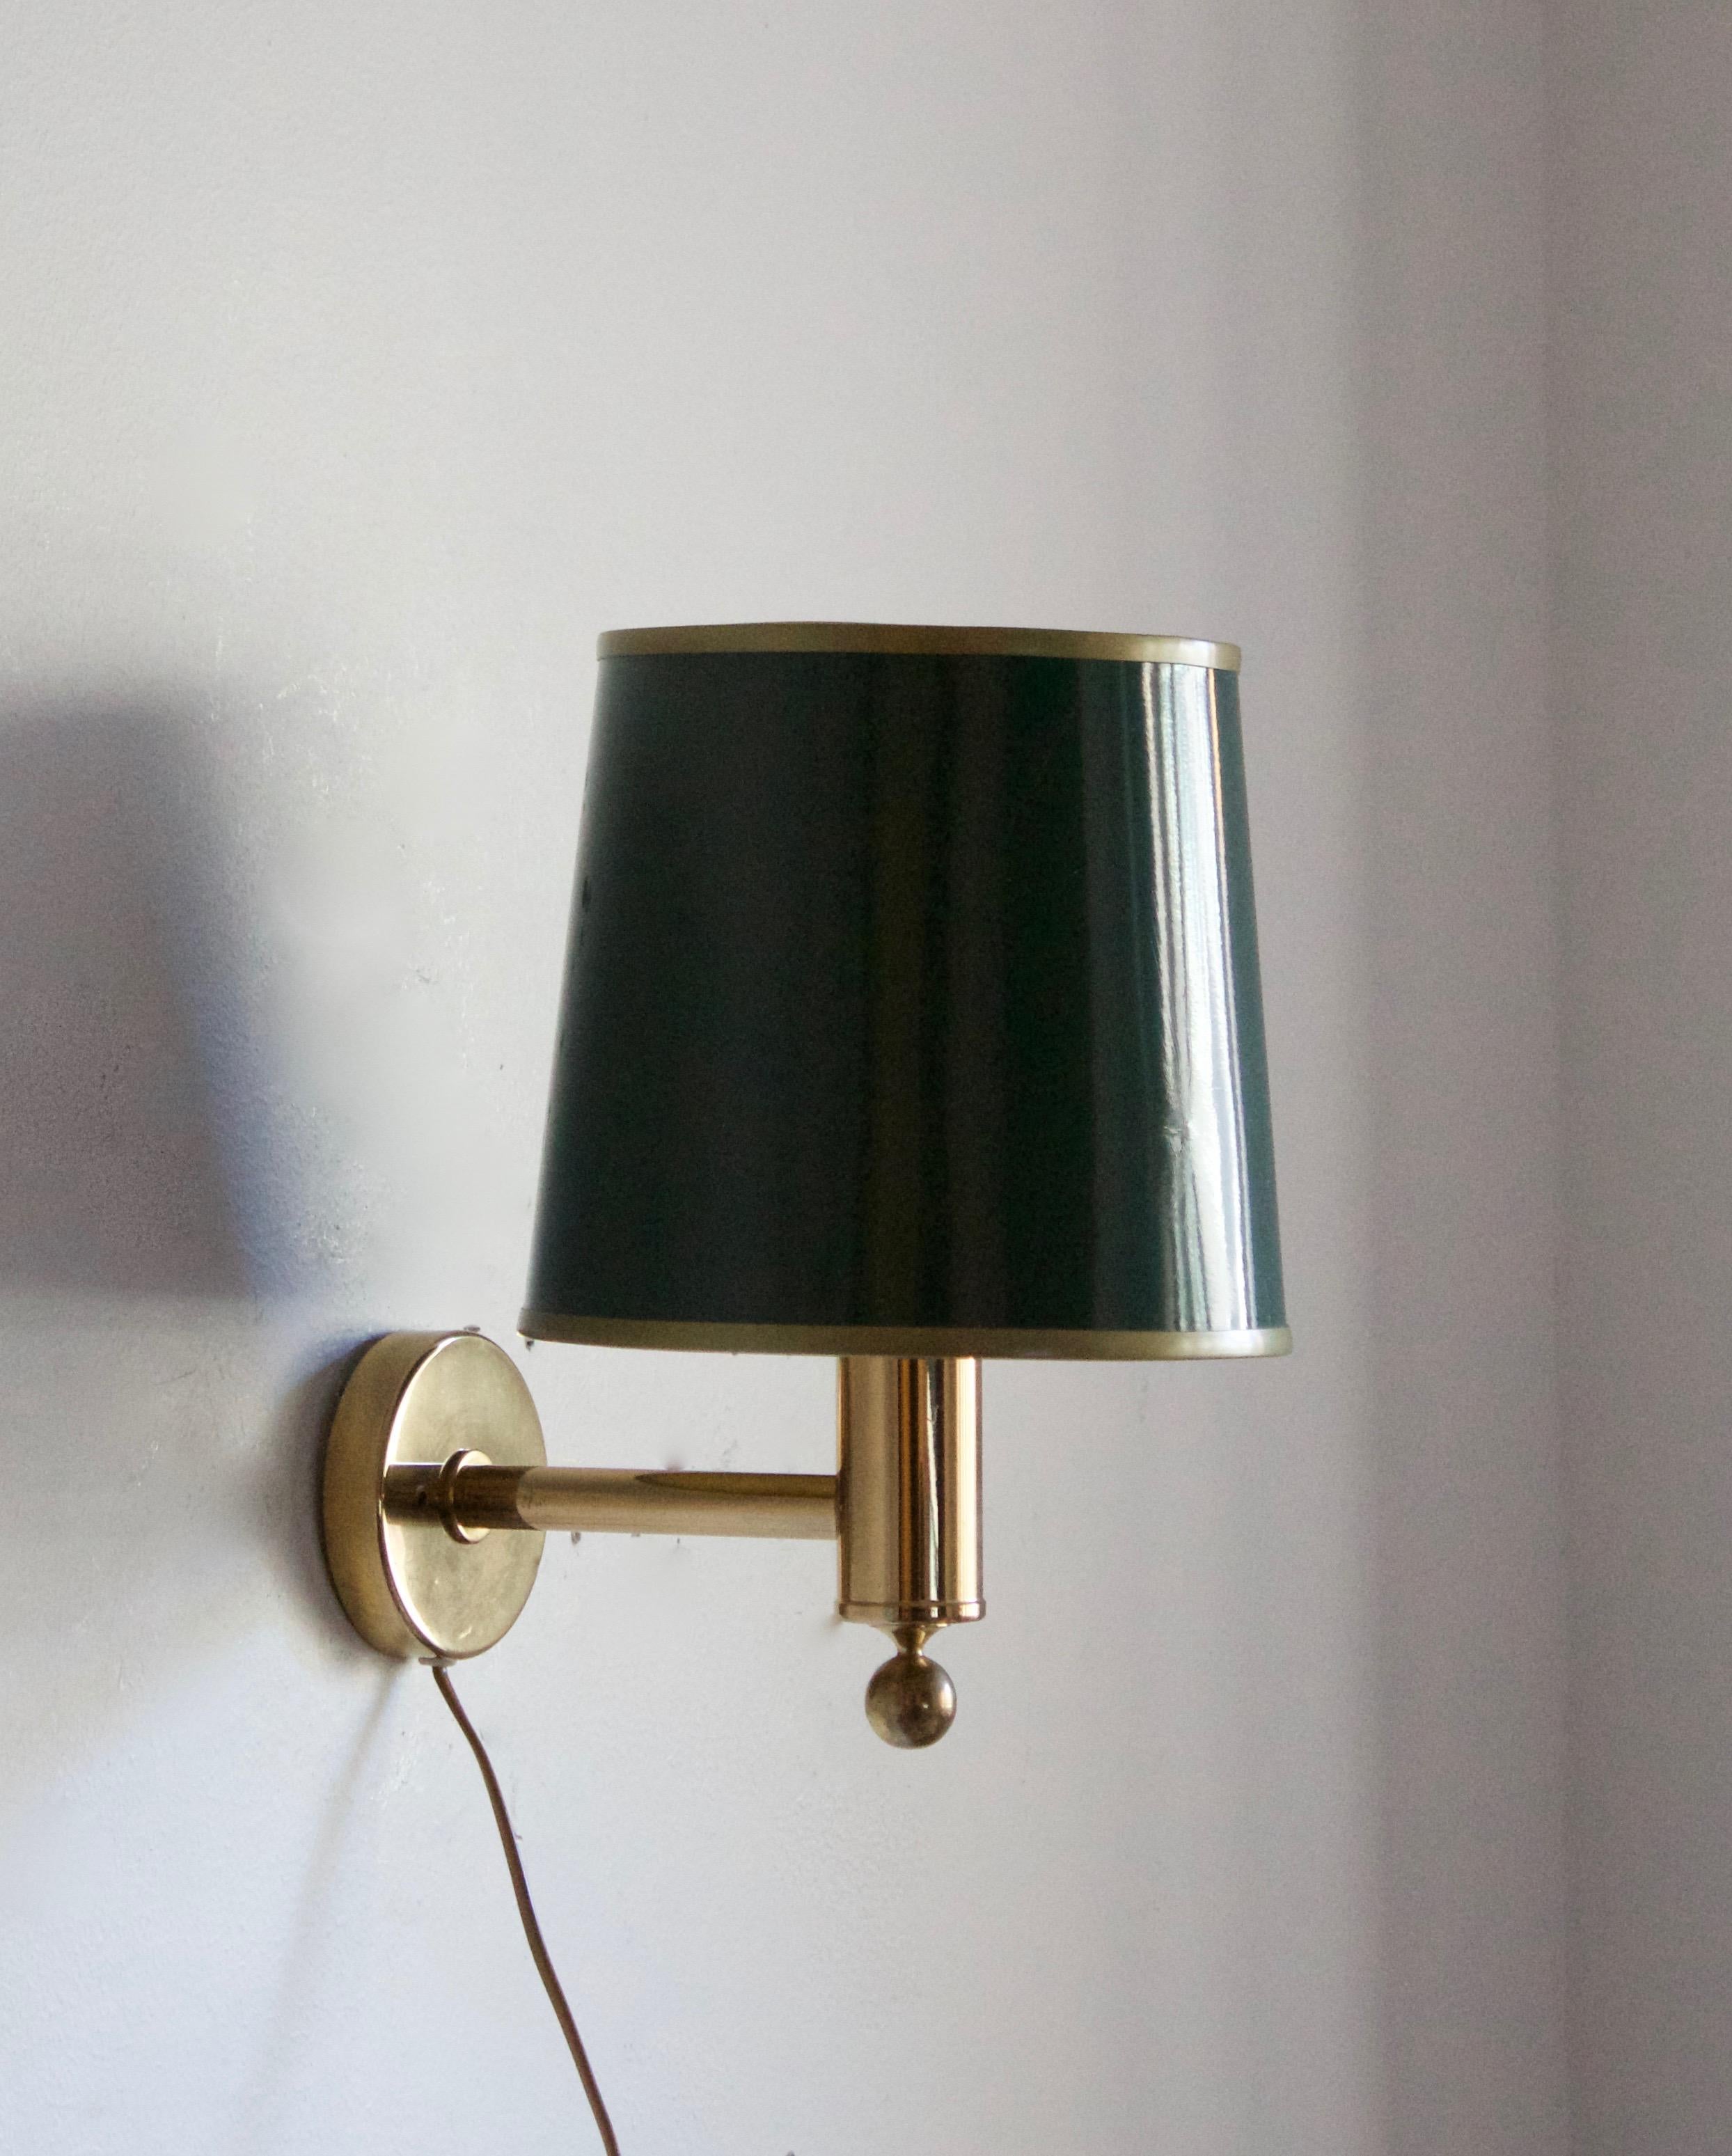 A wall light. Designed and produced by Bergboms, Sweden, circa 1970s. With its original lampshade.

Other designers of the period include Paavo Tynell, Hans Bergström, Josef Frank, and Kaare Klint.